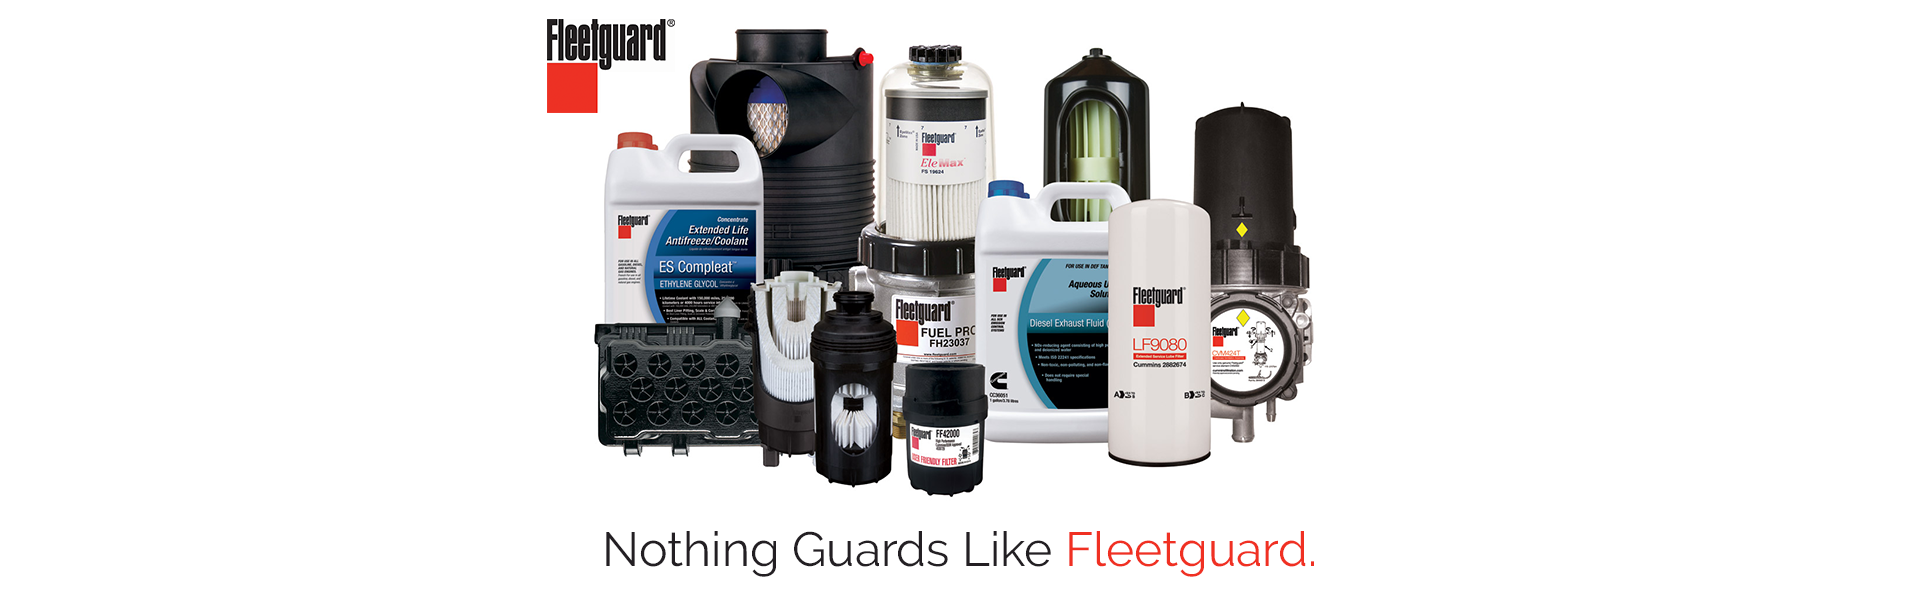 FLEETGUARD FILTERS AND ACCESSORIES!